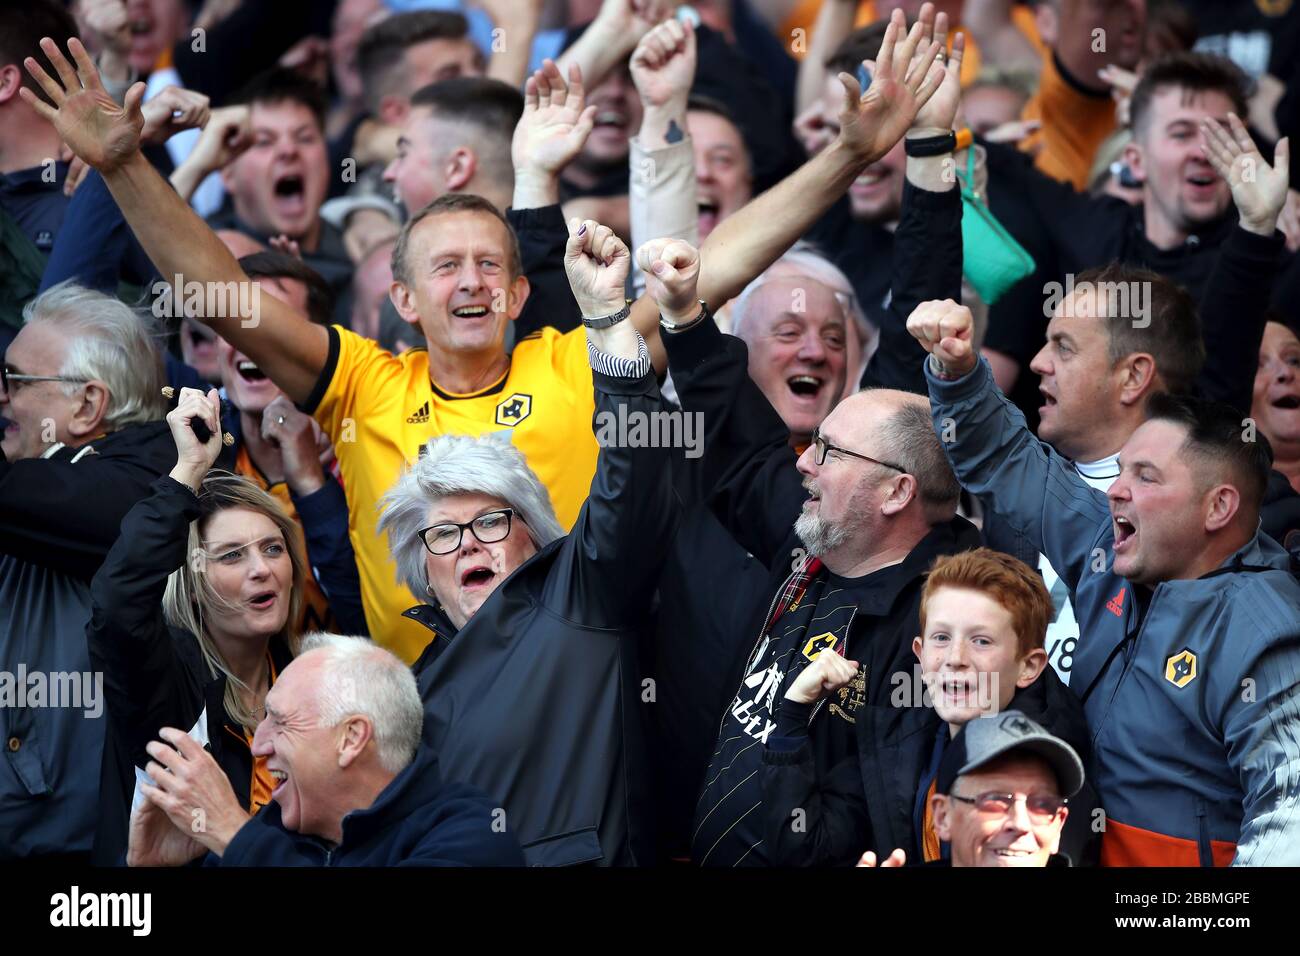 Wolverhampton Wanders fans celebrate their side's first goal of the game, scored by Romain Saiss (not pictured) Stock Photo